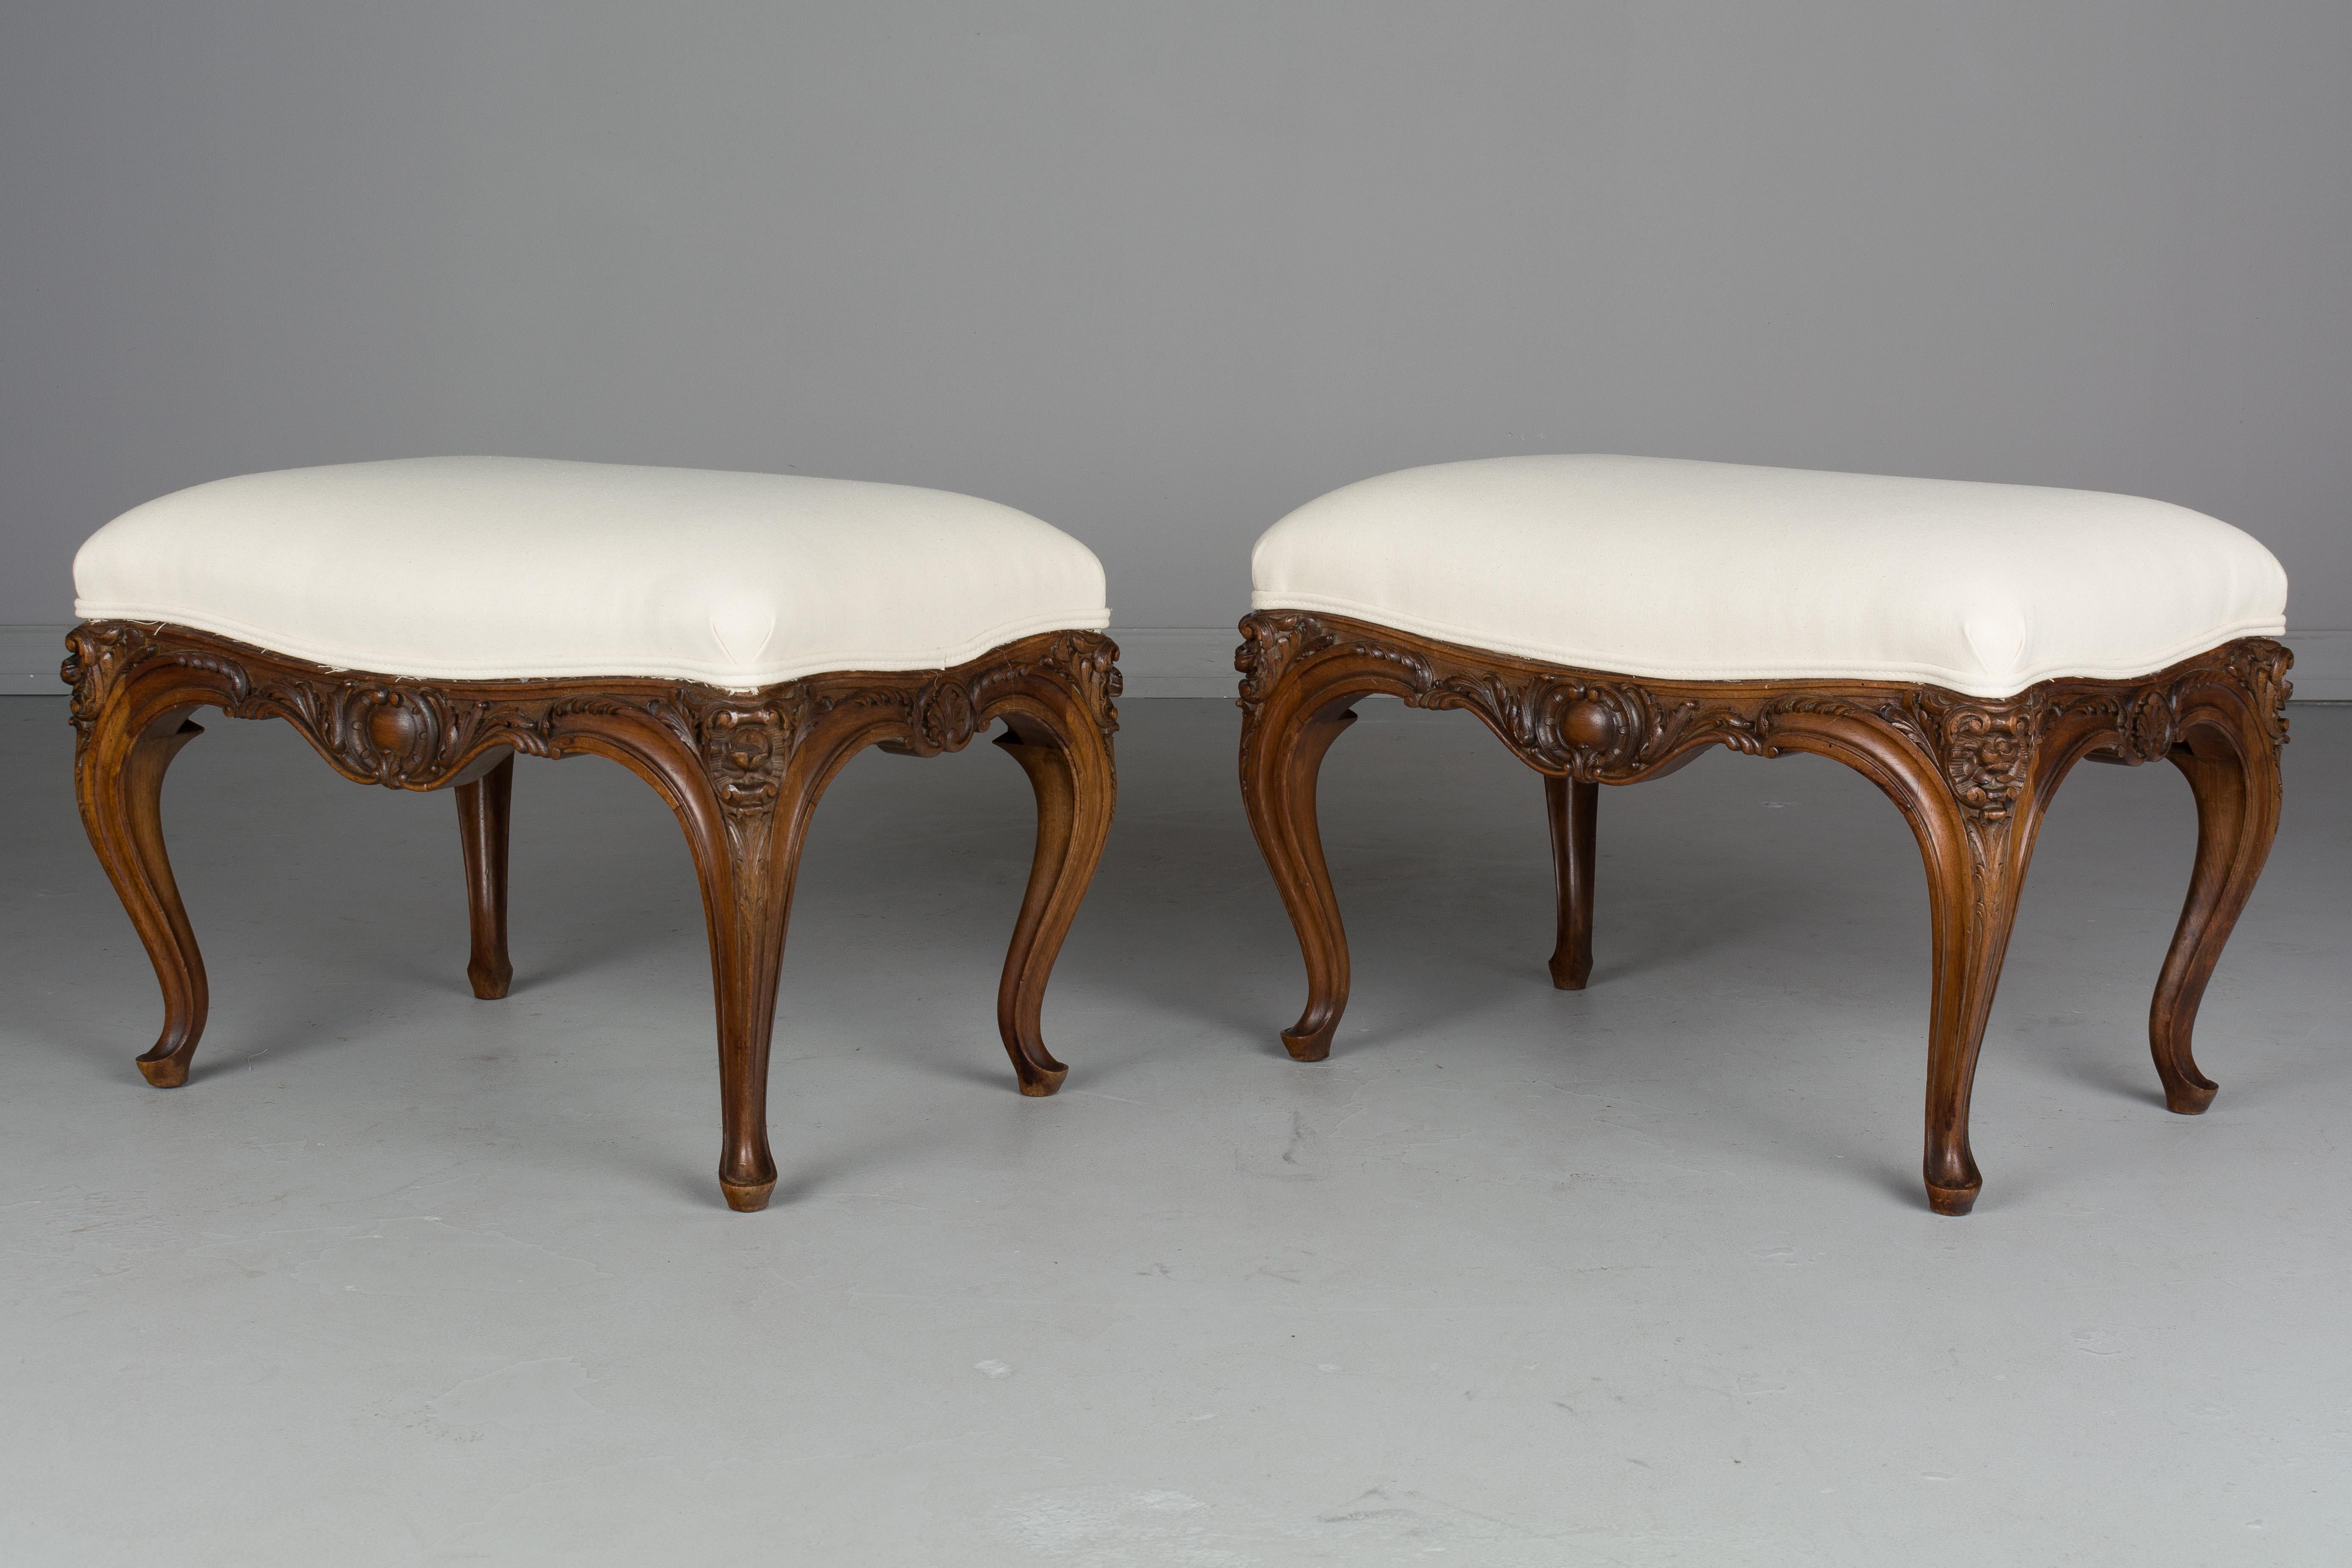 A pair of early 20th century French Louis XV style foot stools or benches made of walnut with nice carved floral details. Newly reupholstered. Please refer to photos for more details. We have a large selection of French antiques at Olivier Fleury,